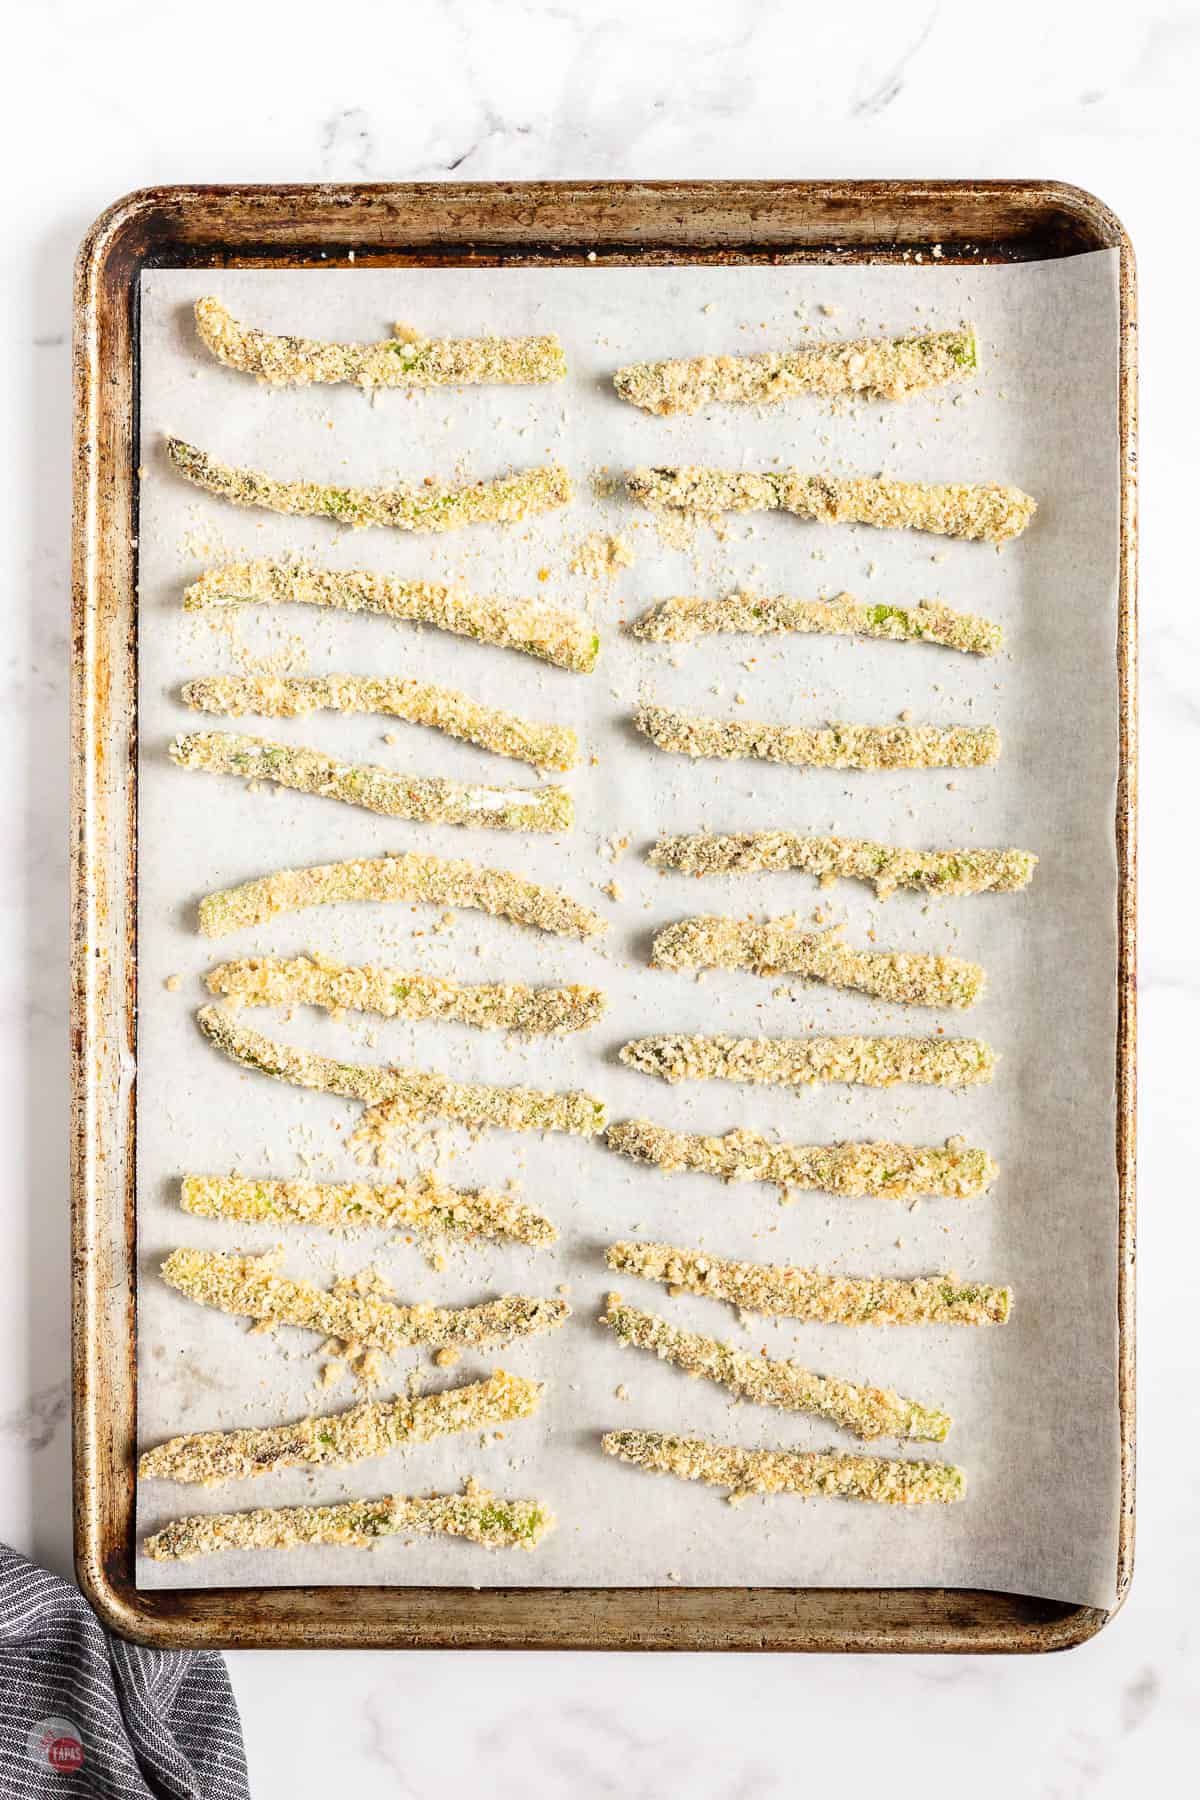 coated asparagus on a baking sheet